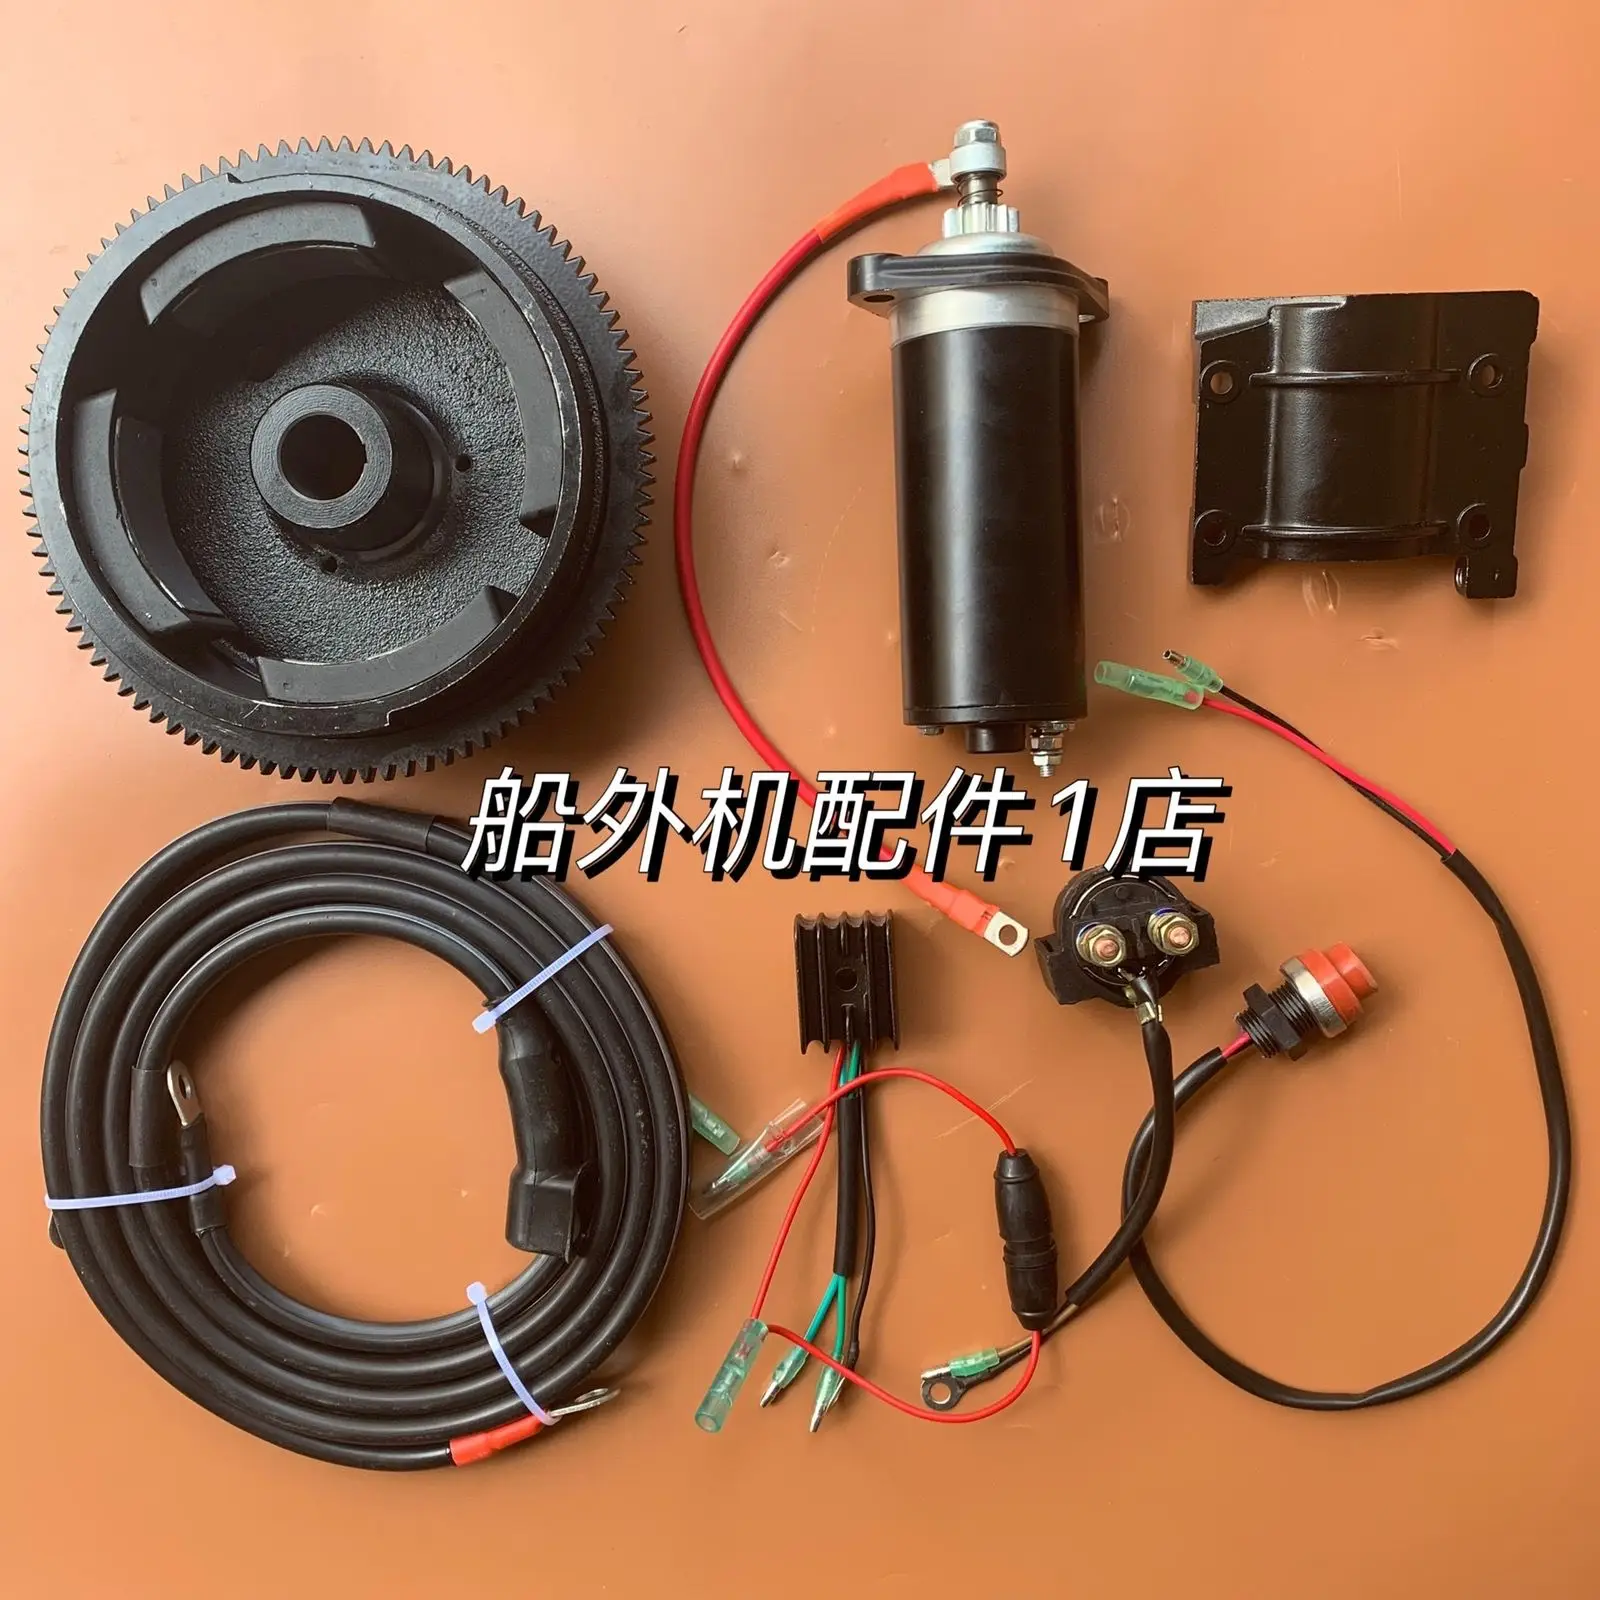 

Applicable to Yamaha 2-punch 15/18 horsepower outboard motor hook motor electric starting set